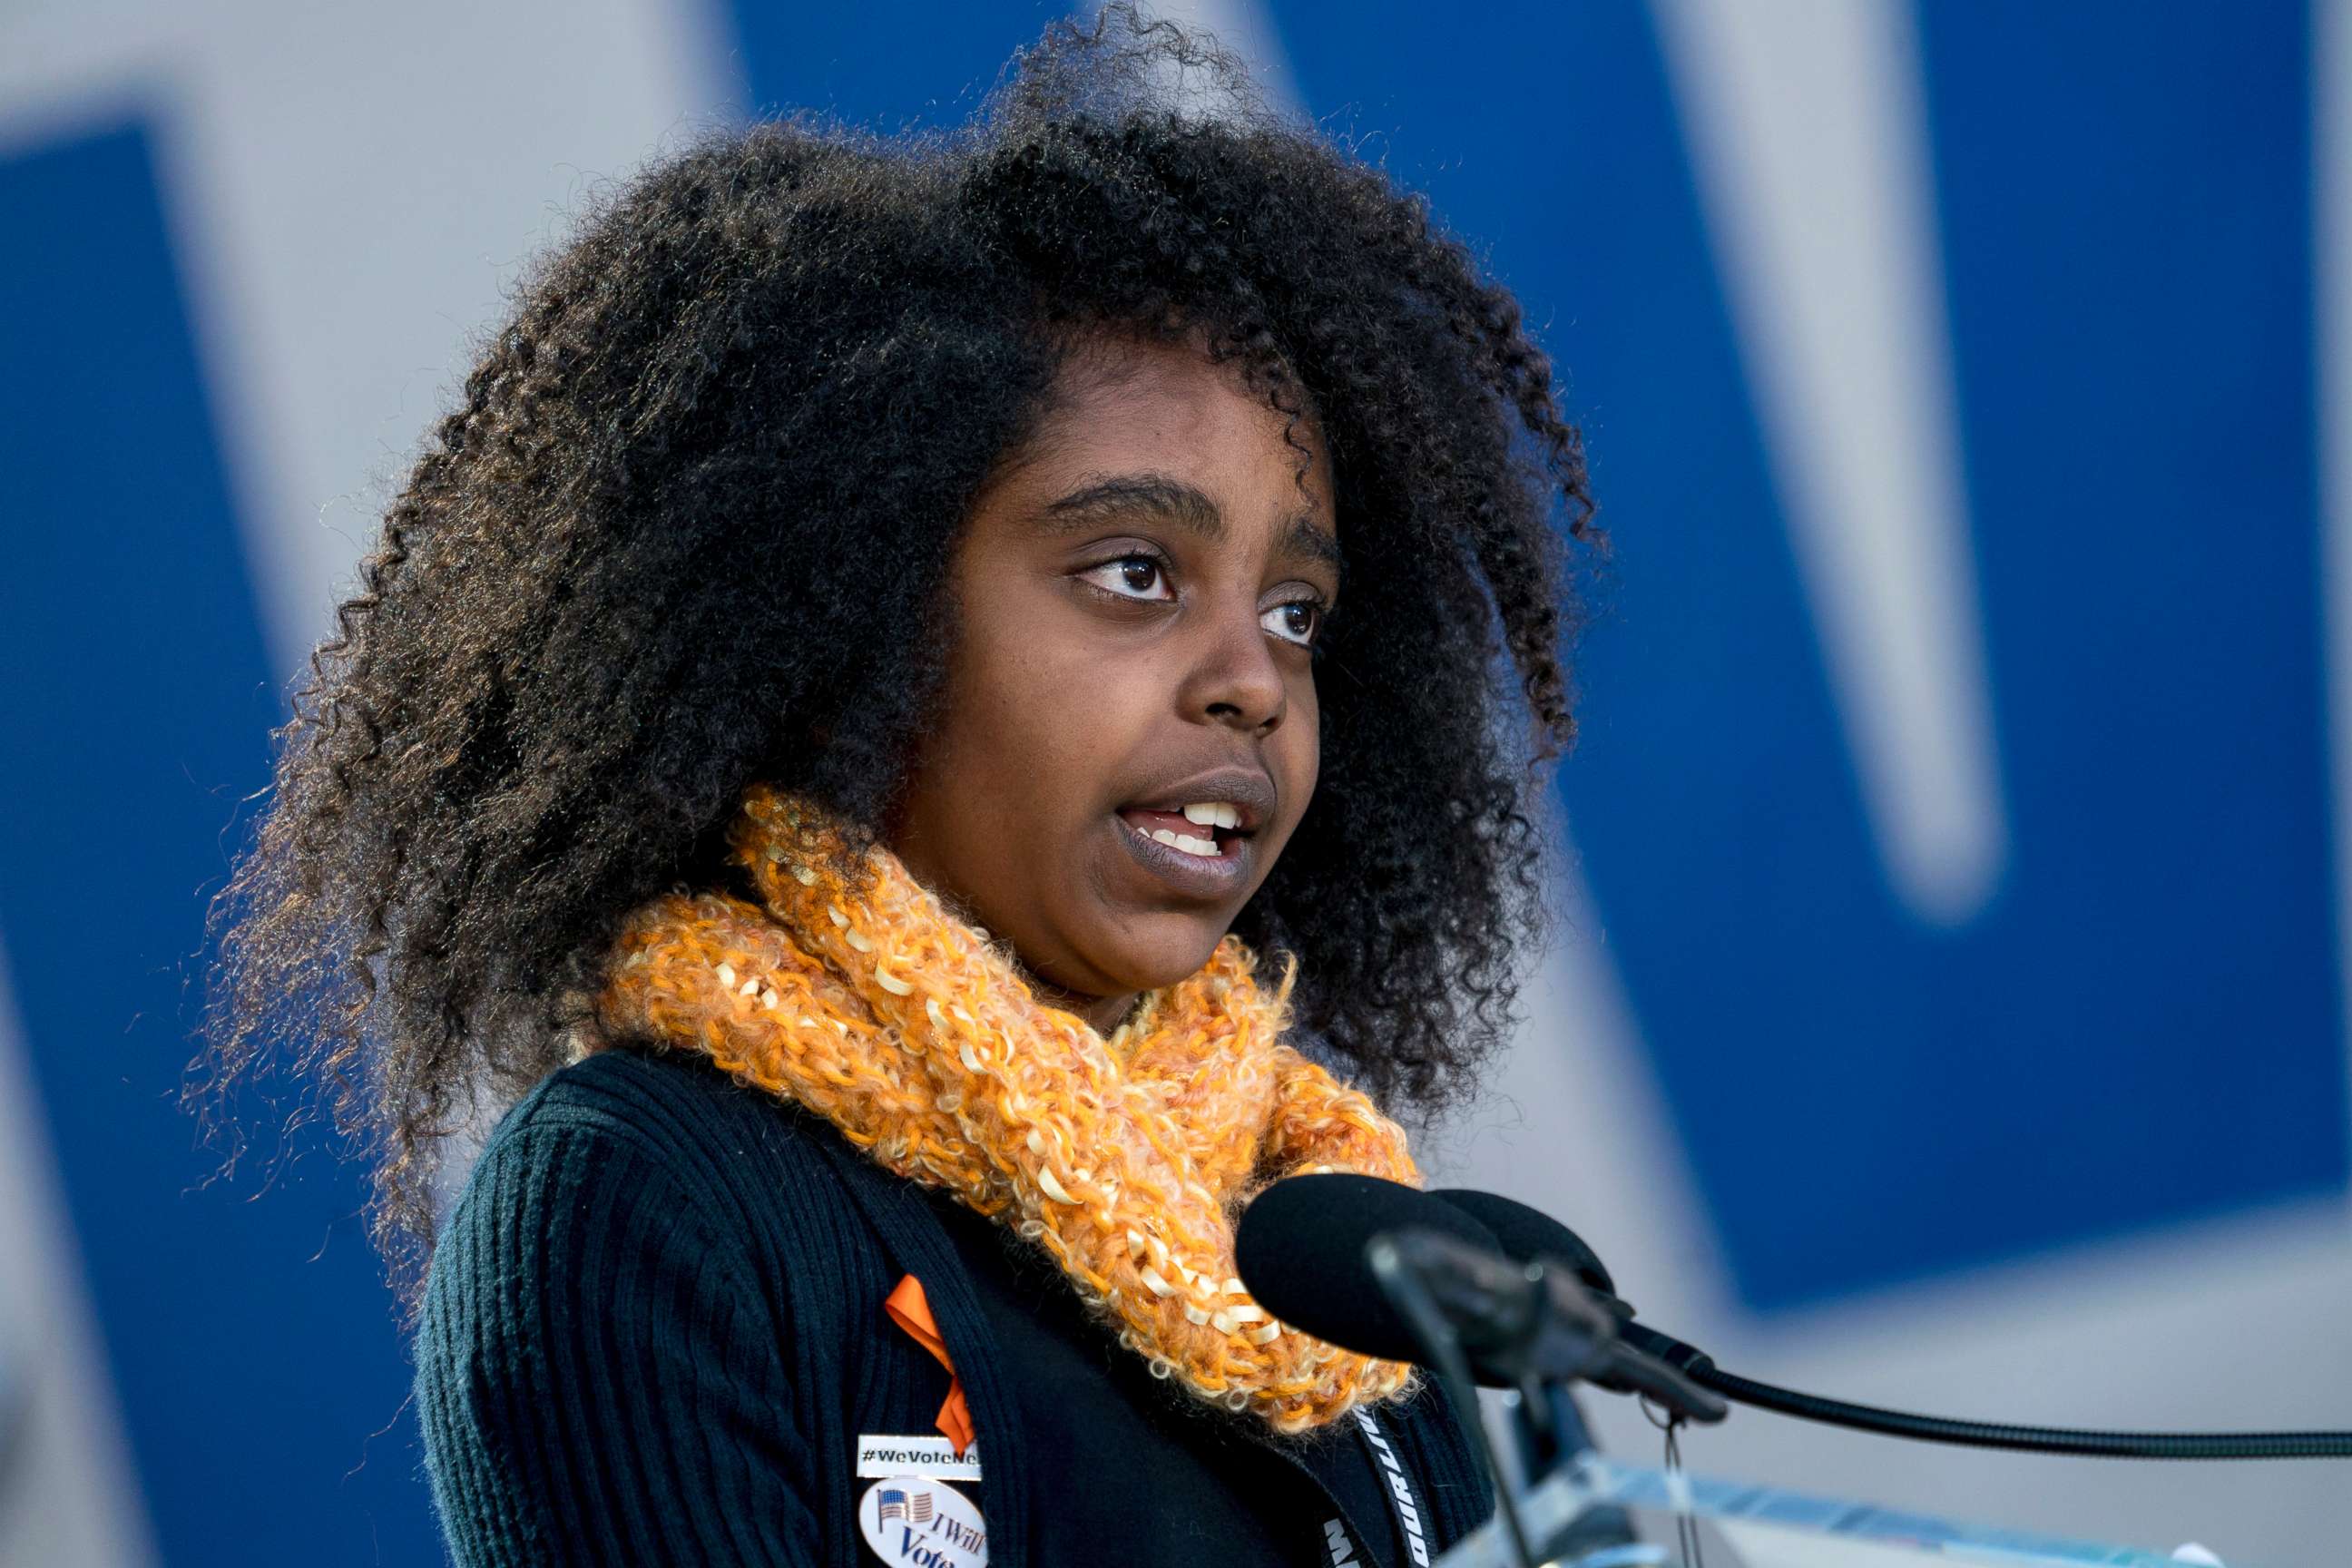 PHOTO: Naomi Wadler, 11, a student at George Mason Elementary School, who organized a school walkout at her school in Alexandria, Va., speaks during the March for Our Lives rally in support of gun control in Washington D.C., March 24, 2018.